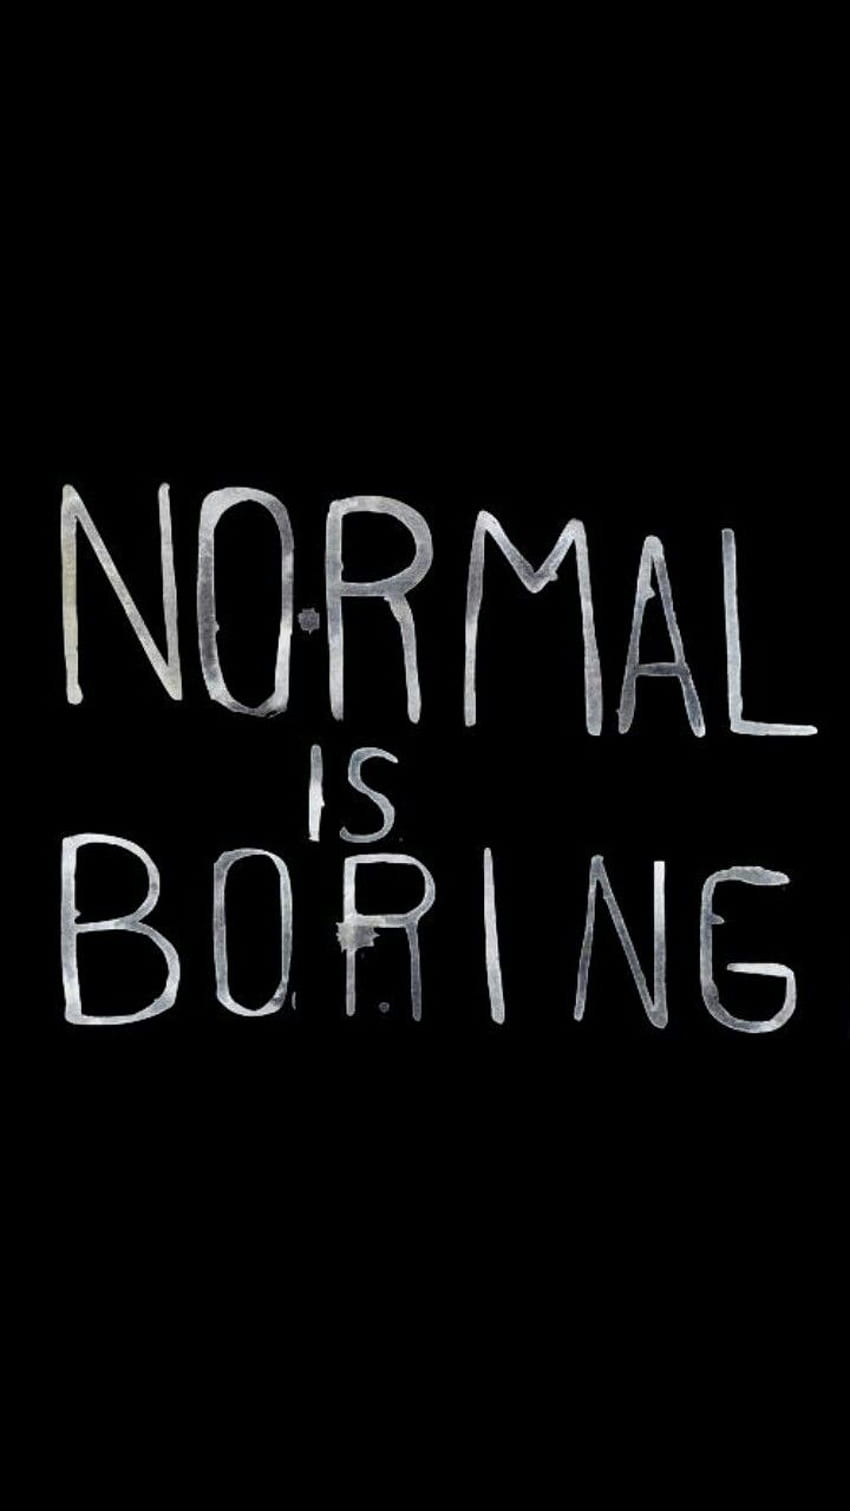 Normal Is Boring. Bored quotes, Normal is boring, Bored HD phone wallpaper